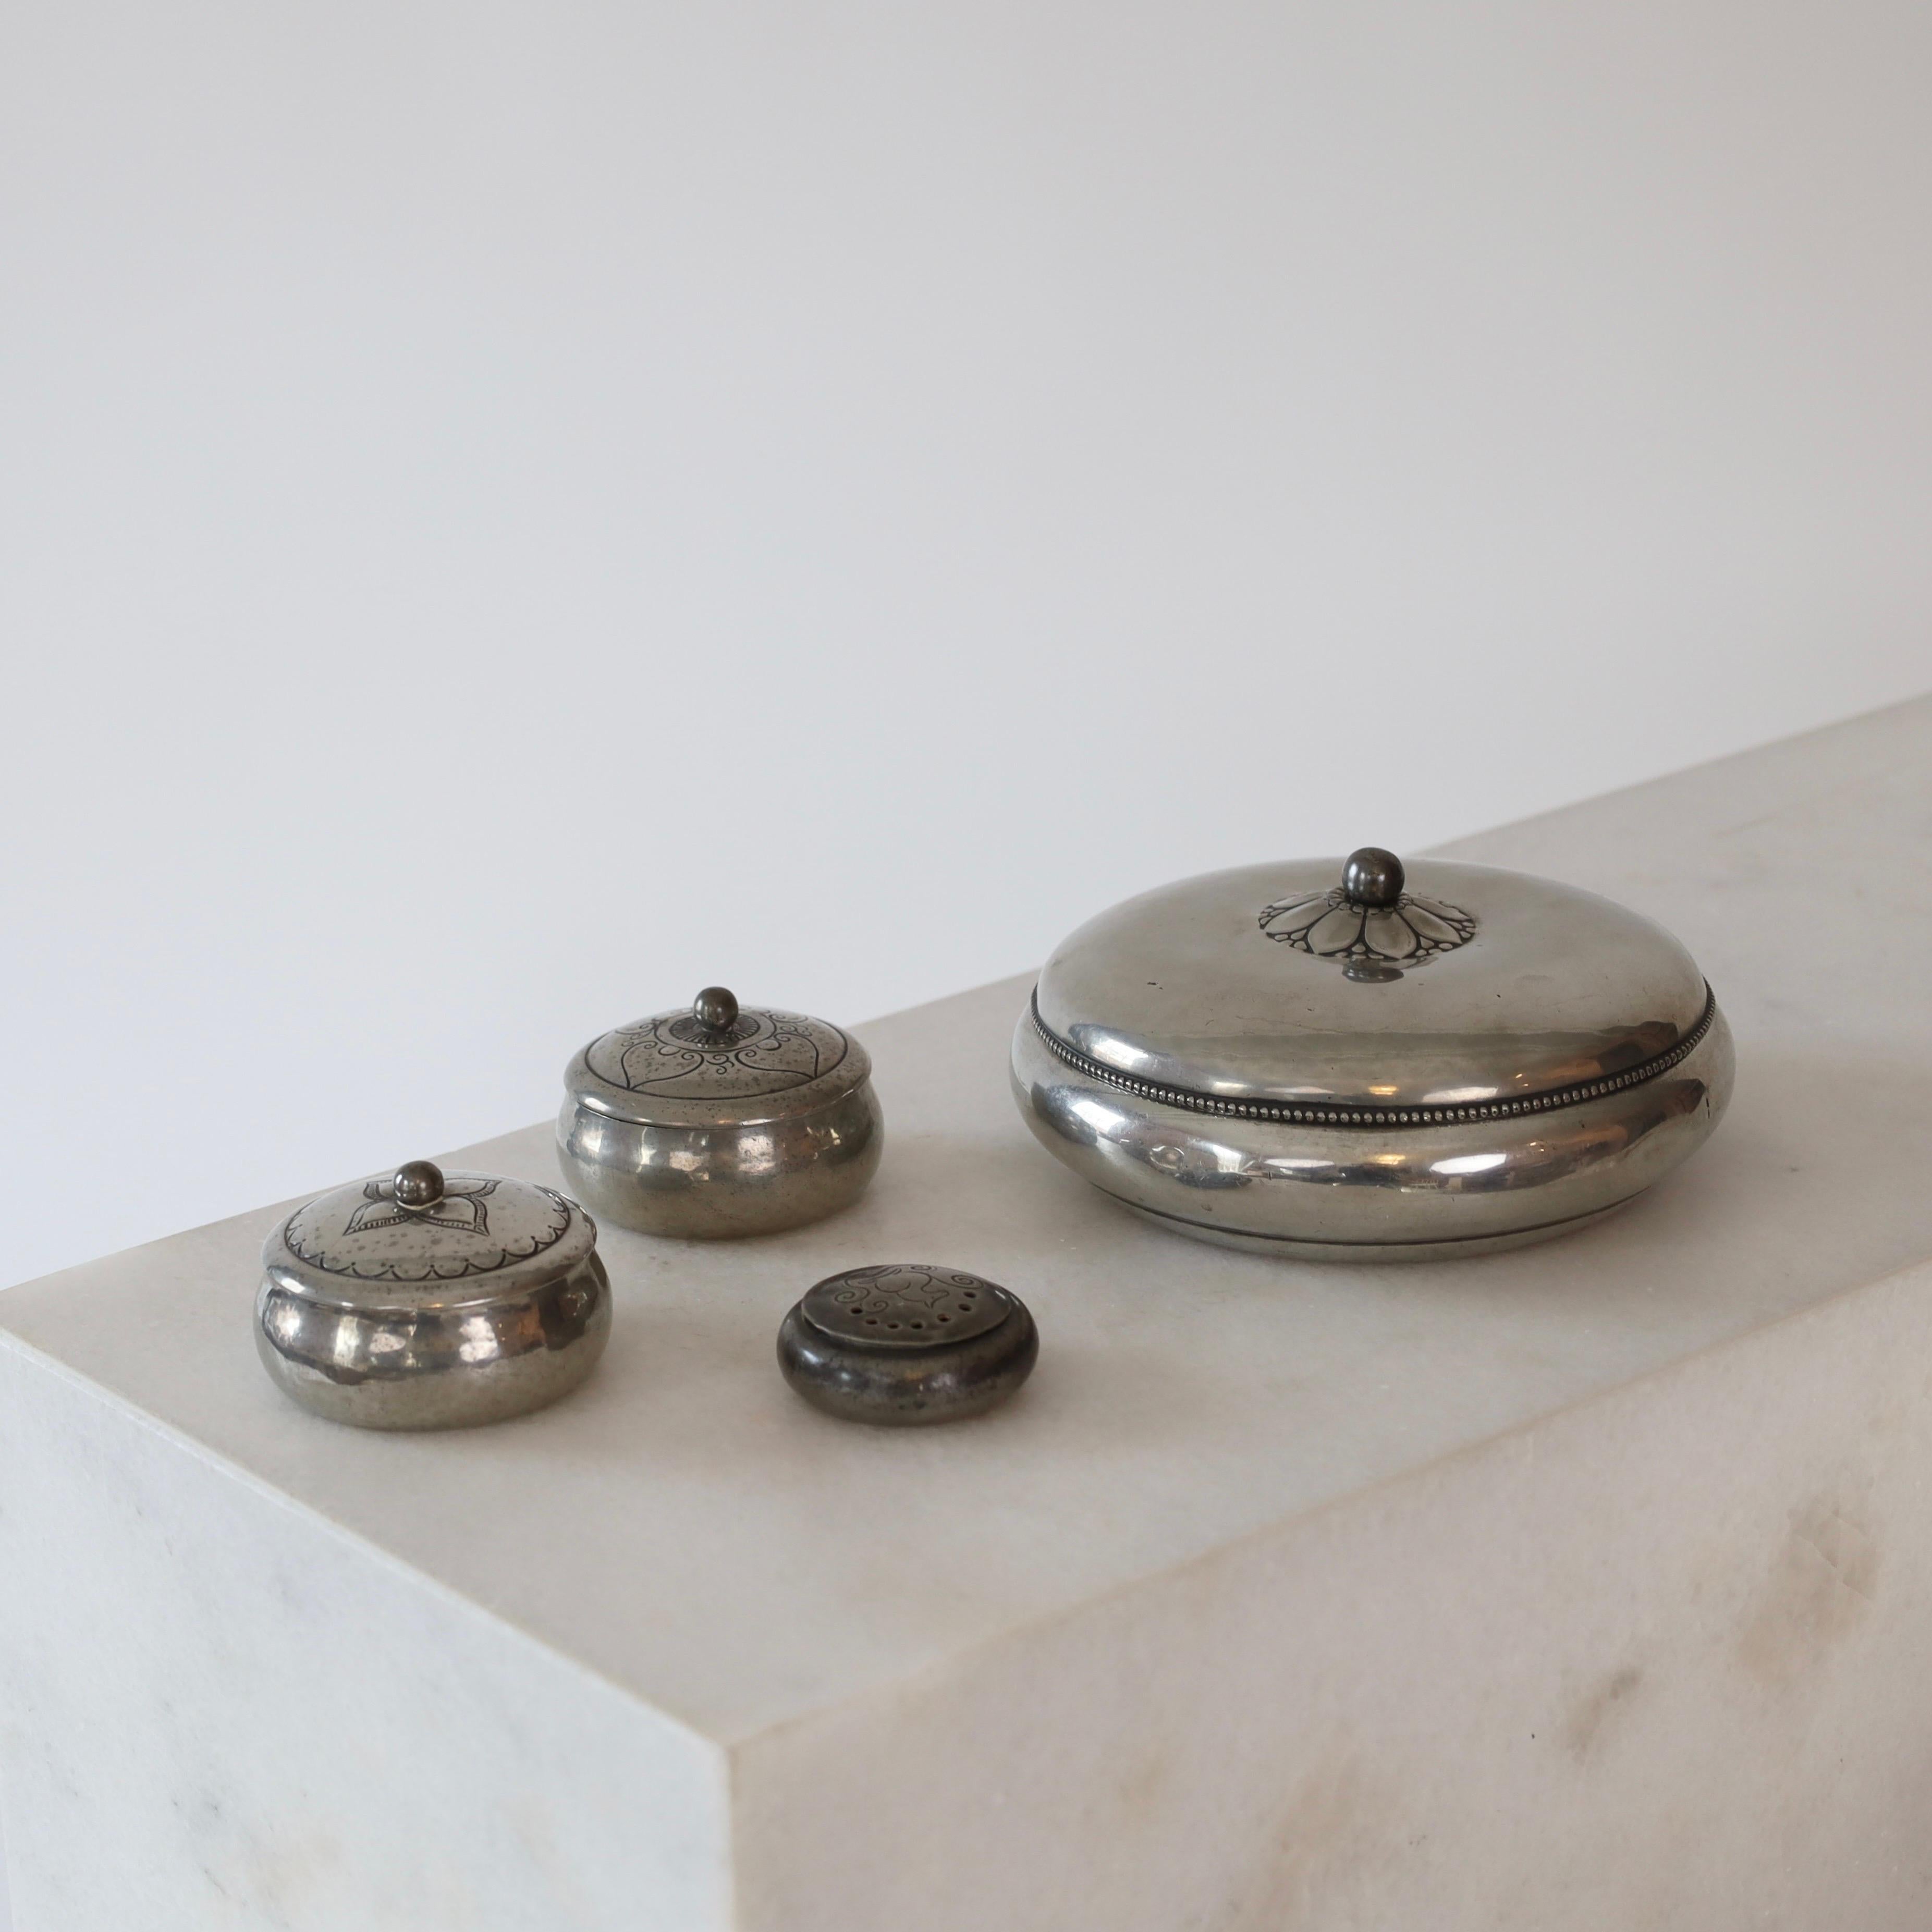 An extraordinary set of 4 lidded round pewter box designed by Just Andersen in the early 1920s. One larger and two small round boxes with lids ornaments and one tiny scent box. It is a rare find ready for a beautiful spot.

* A quartet of round